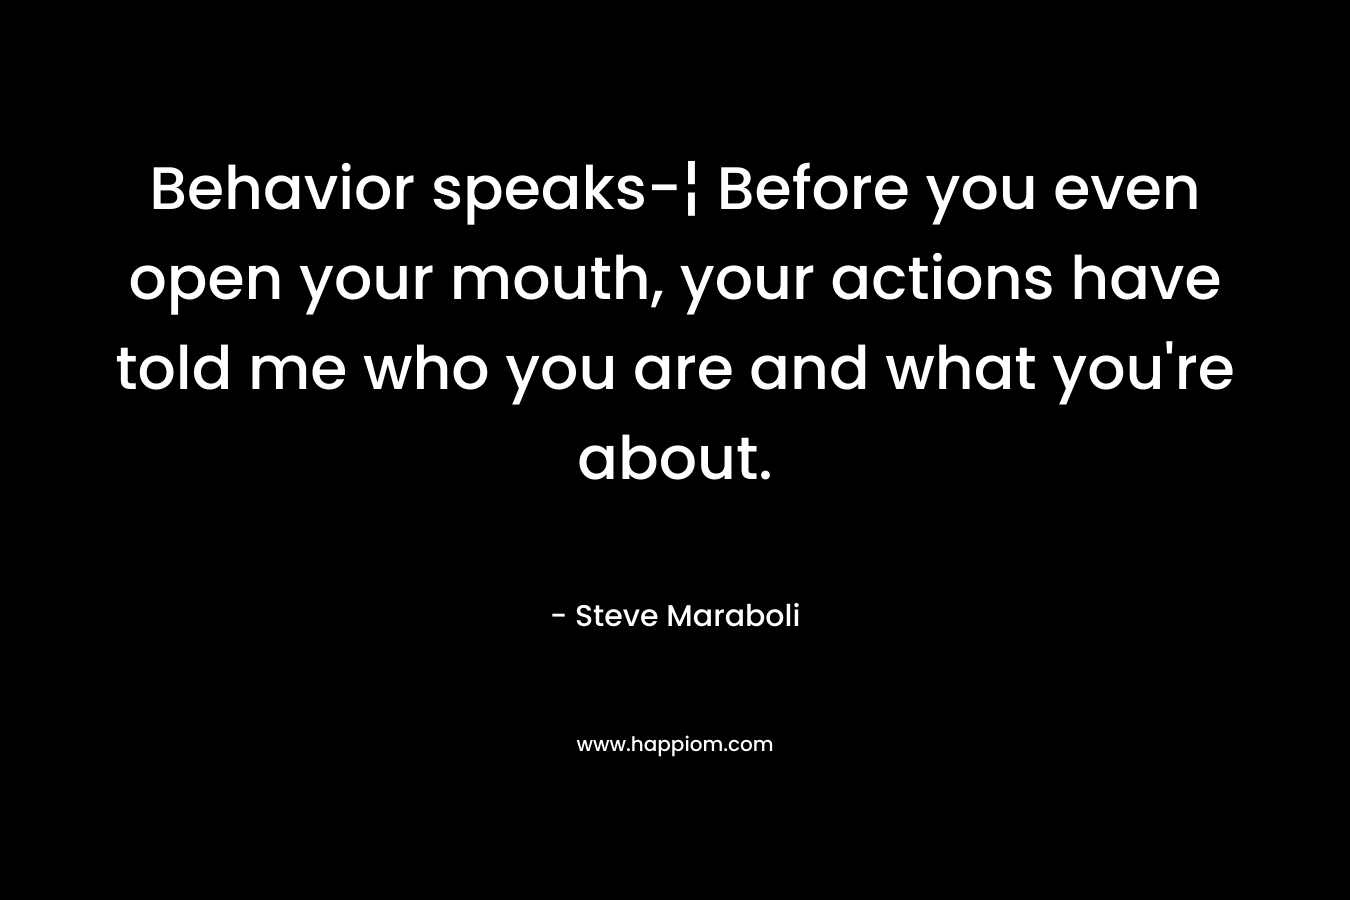 Behavior speaks-¦ Before you even open your mouth, your actions have told me who you are and what you're about.